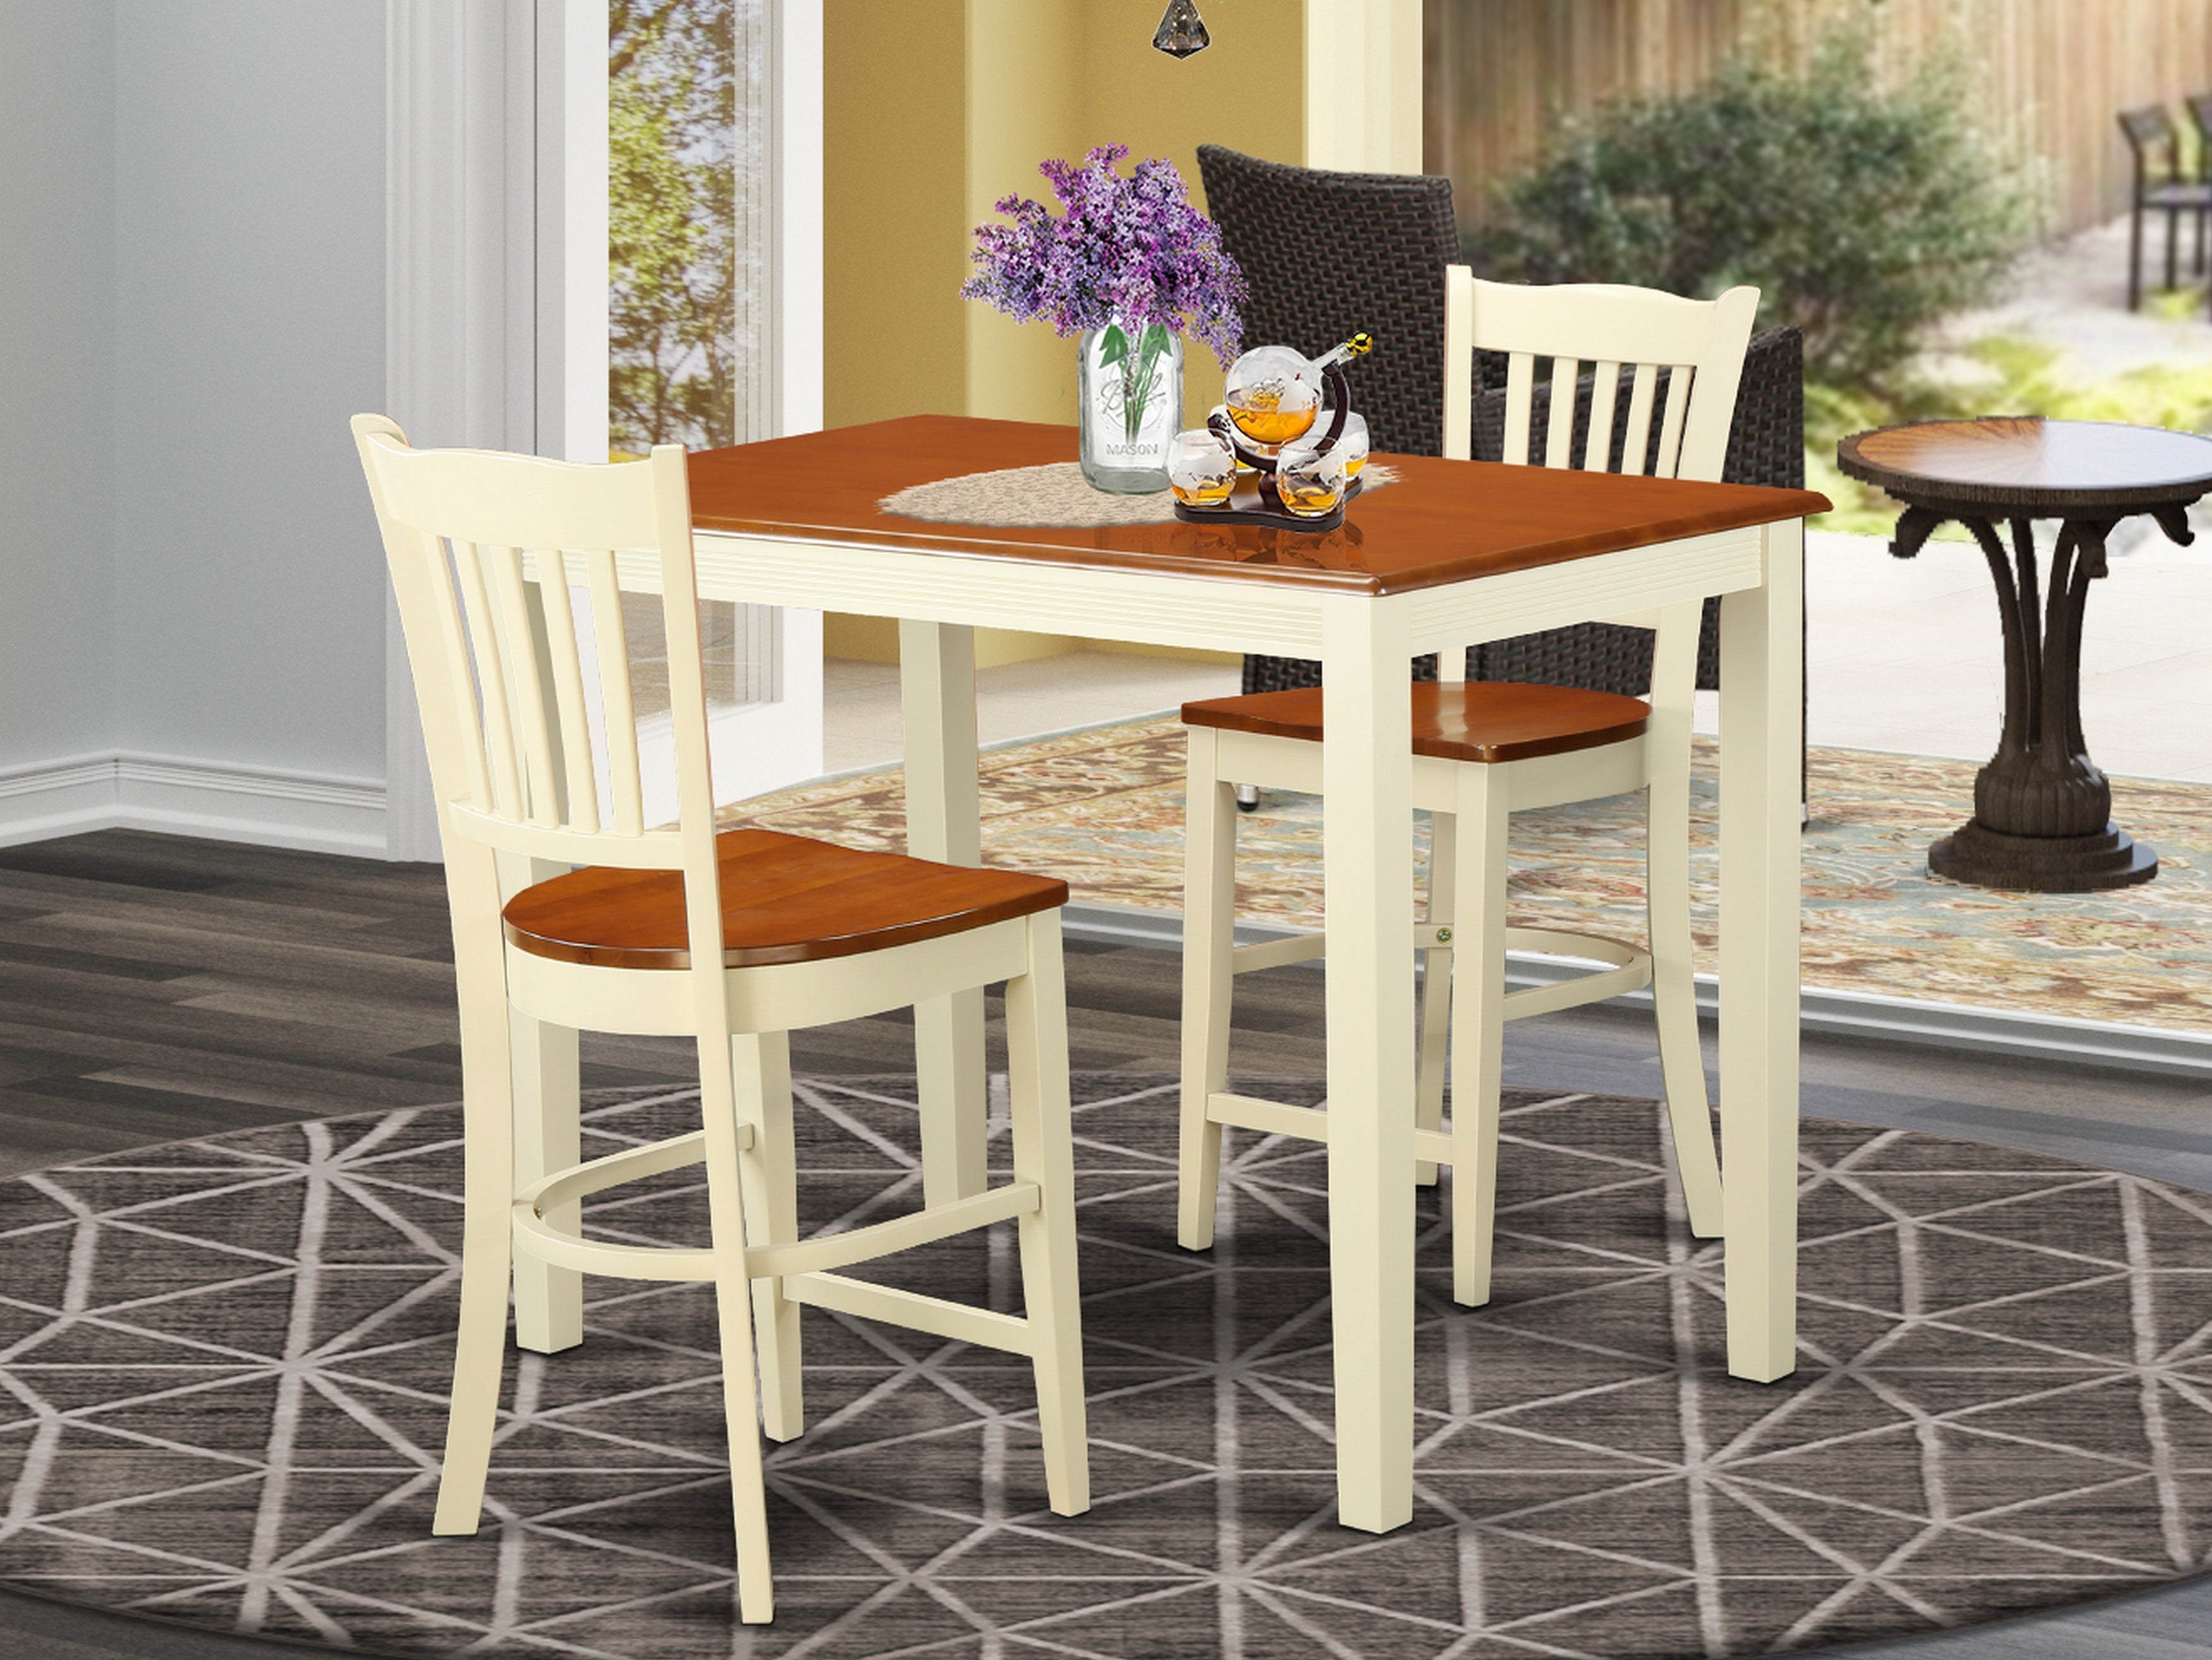 3 Pc Counter Height Dining Table and 2 Kitchen Chairs In Buttermilk